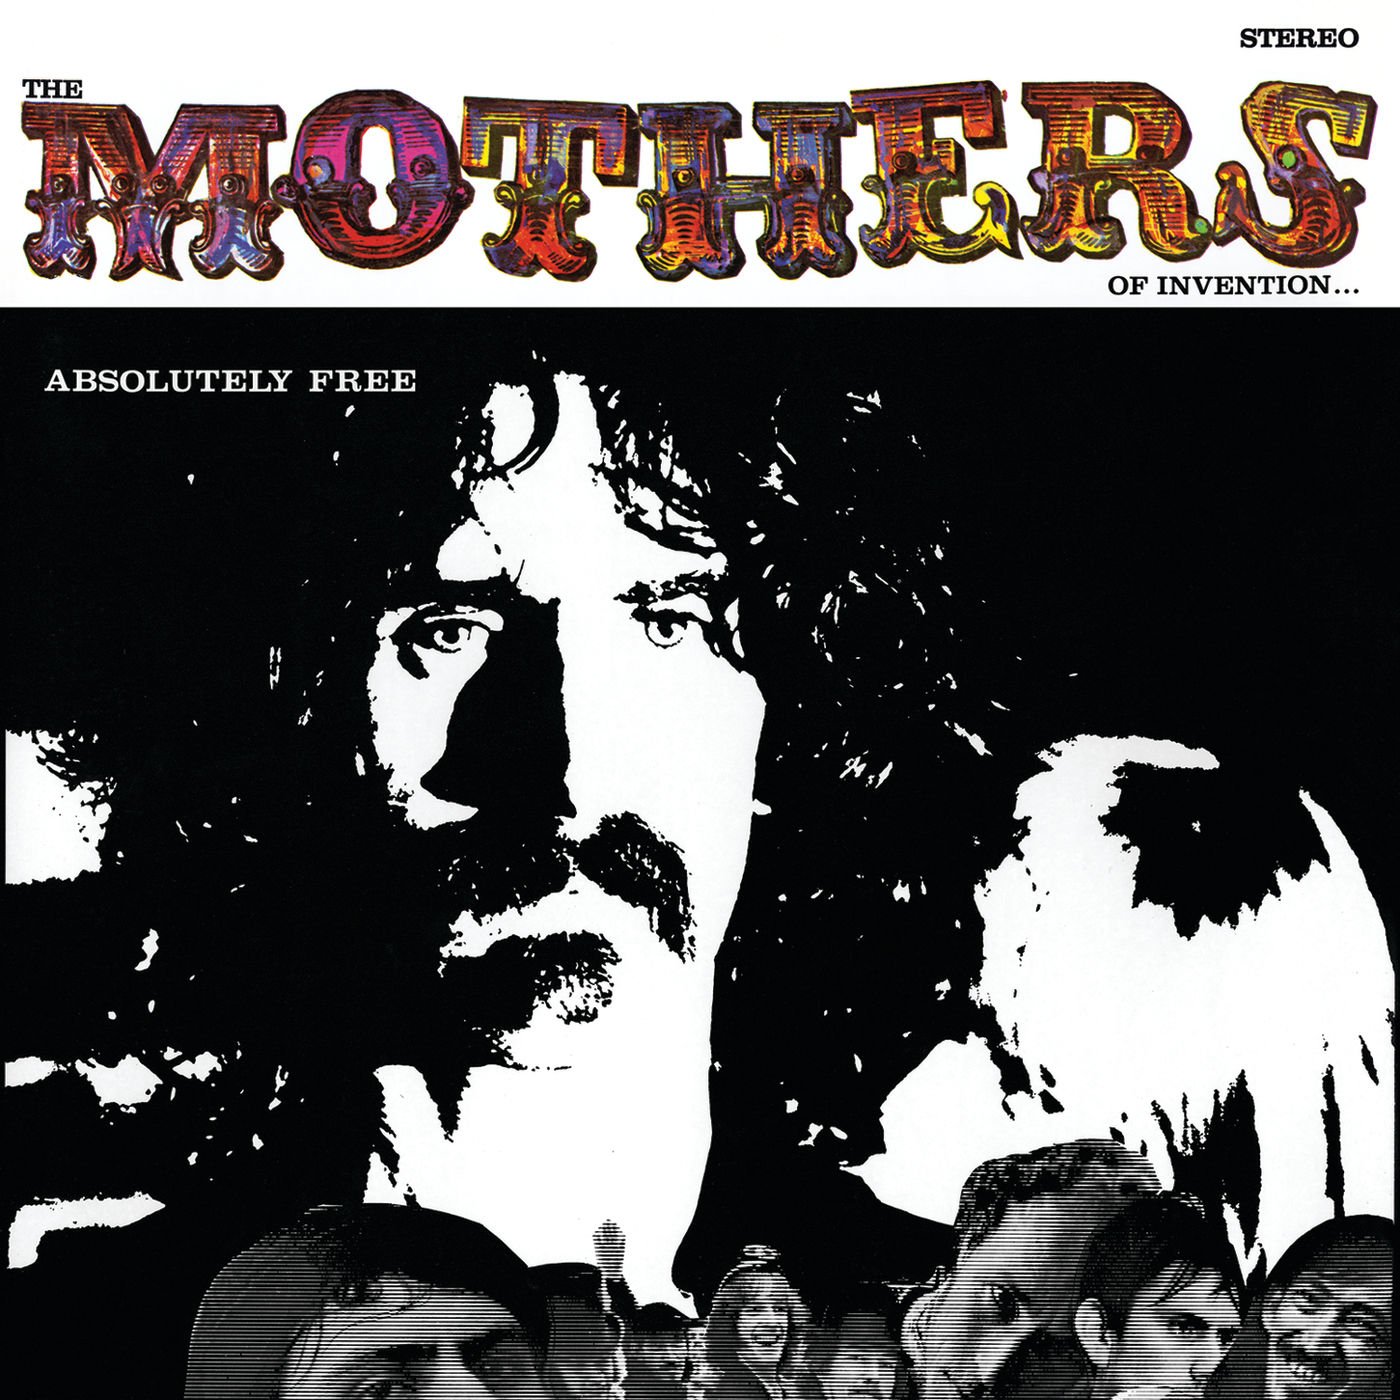 Frank Zappa and The Mothers Of Invention-Absolutely Free-24-192-WEB-FLAC-REMASTERED-2021-OBZEN